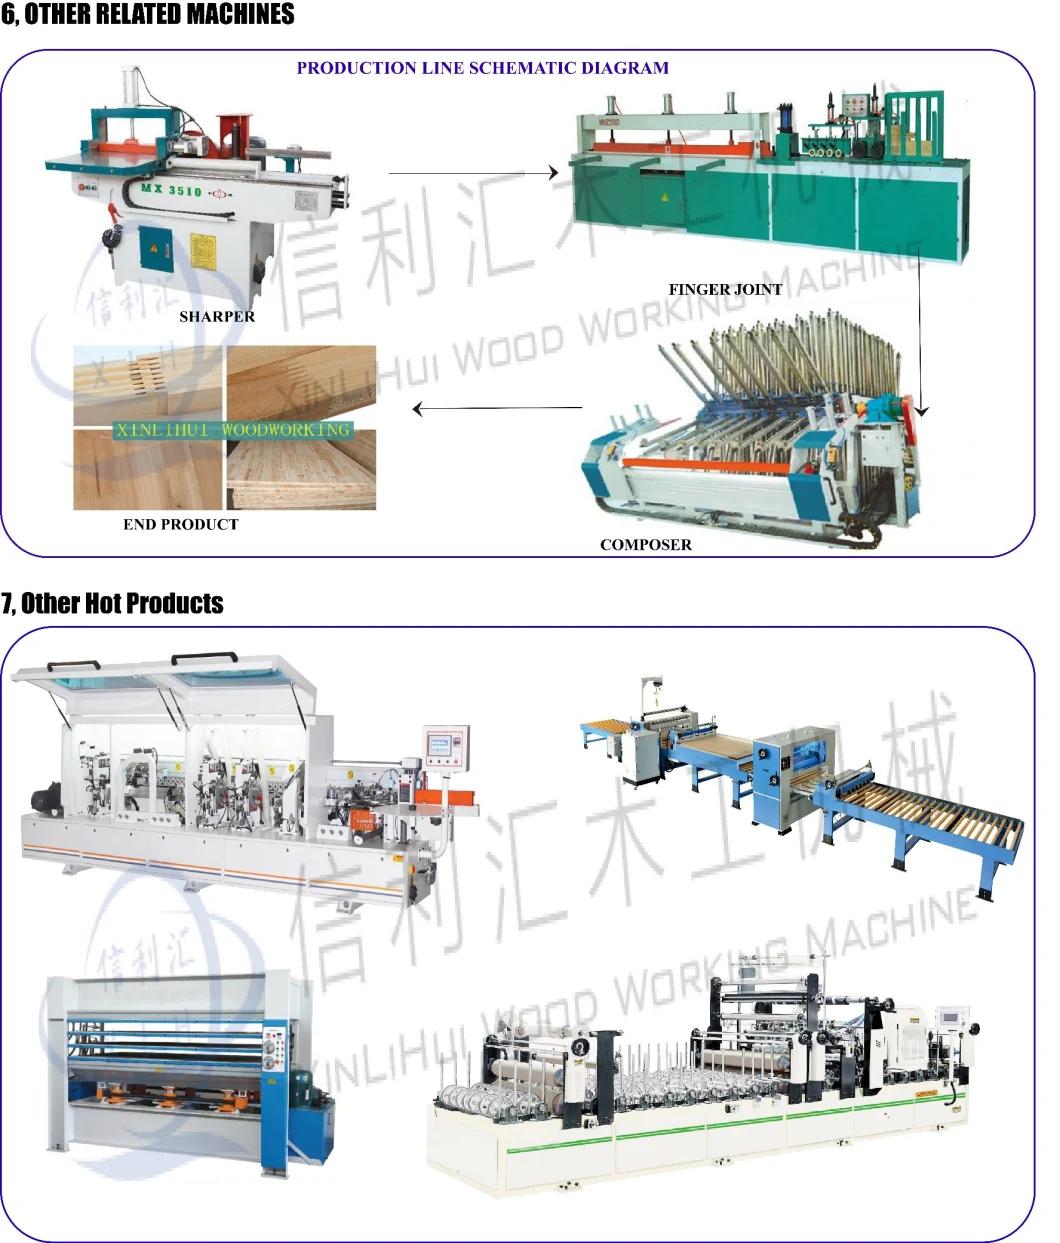 Shaper and Finger Jounter Automatic Finger Jointing Line Automatic Finger Joining Line with a Shaper and a Press, Joint Short Pieces to Make Length of Max 6600m